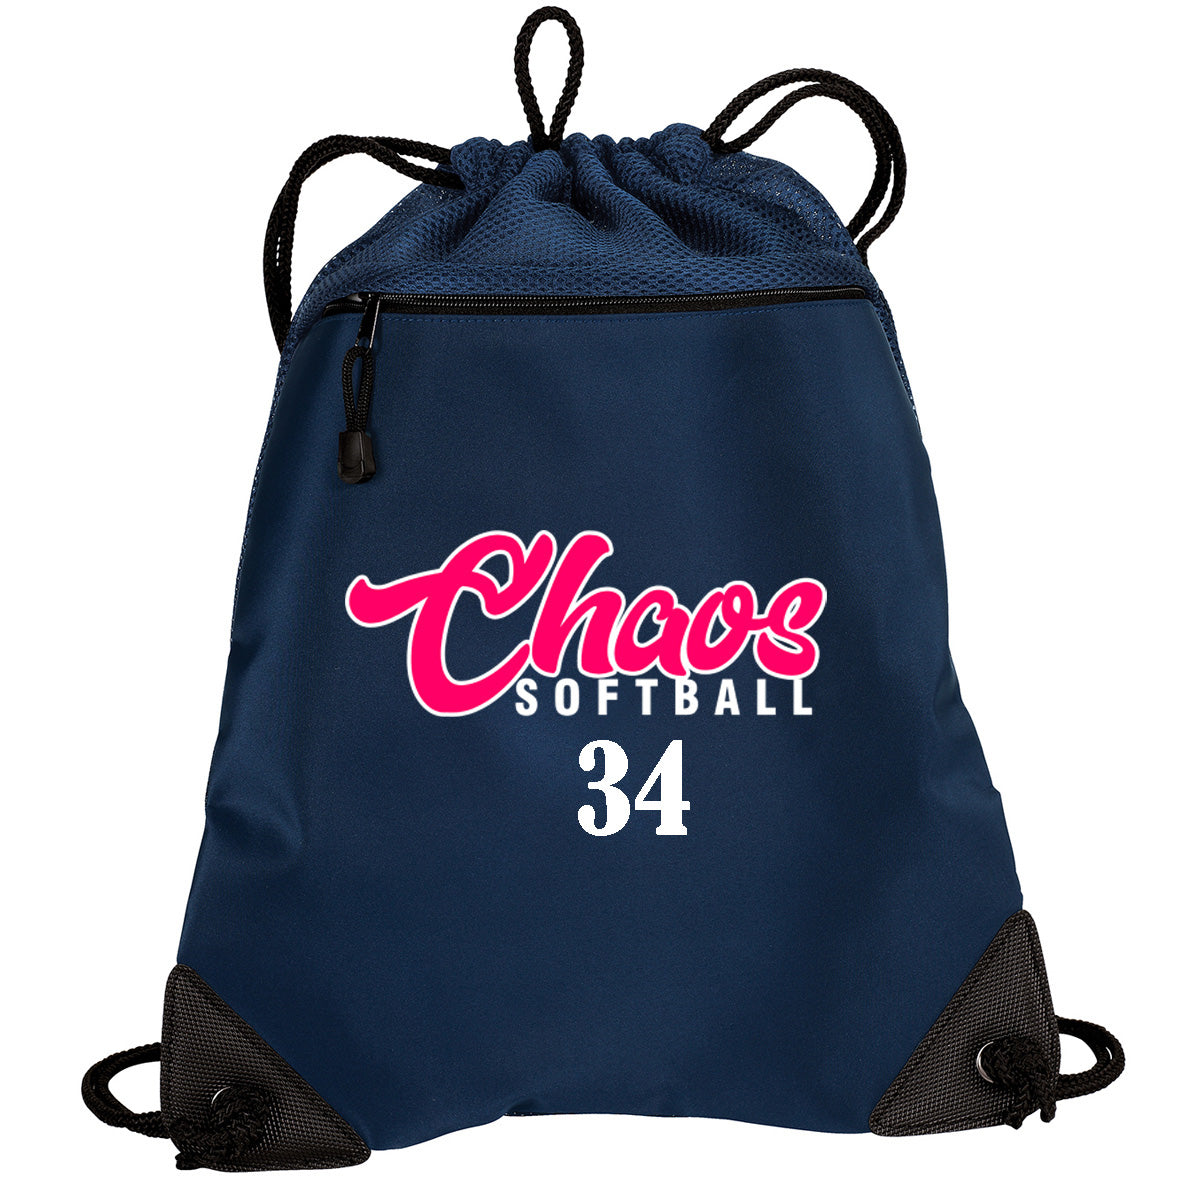 Chaos - Cinch Backpack with Chaos Softball (DopeDtyle Font) - Navy (BG810) - Southern Grace Creations